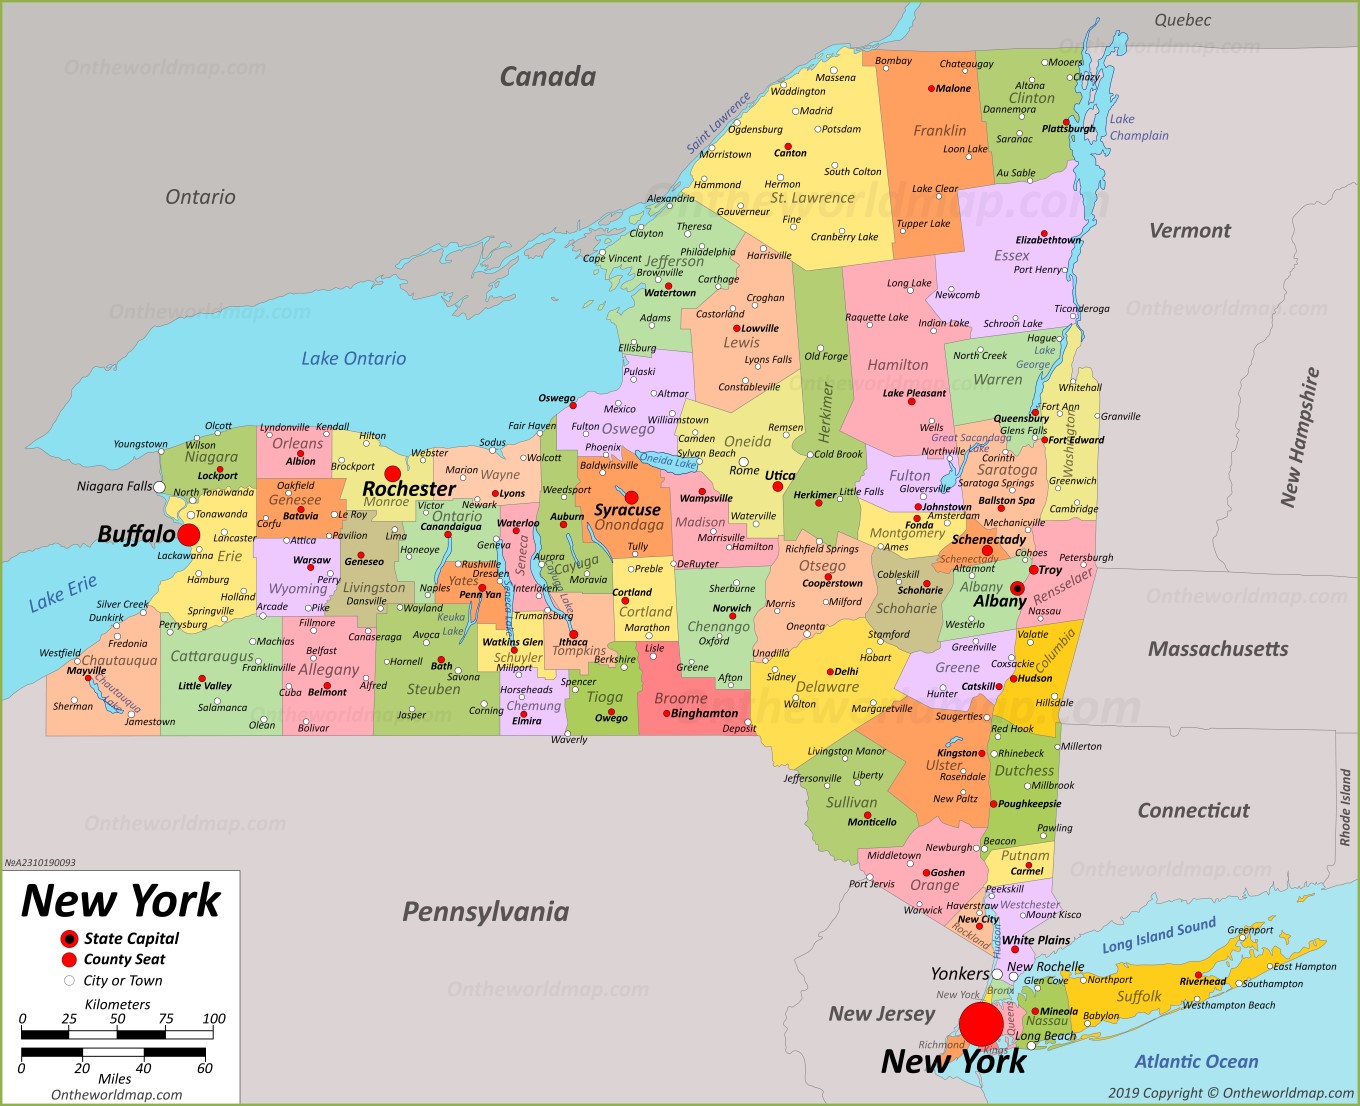 a map of new york state New York State Maps Usa Maps Of New York Ny a map of new york state